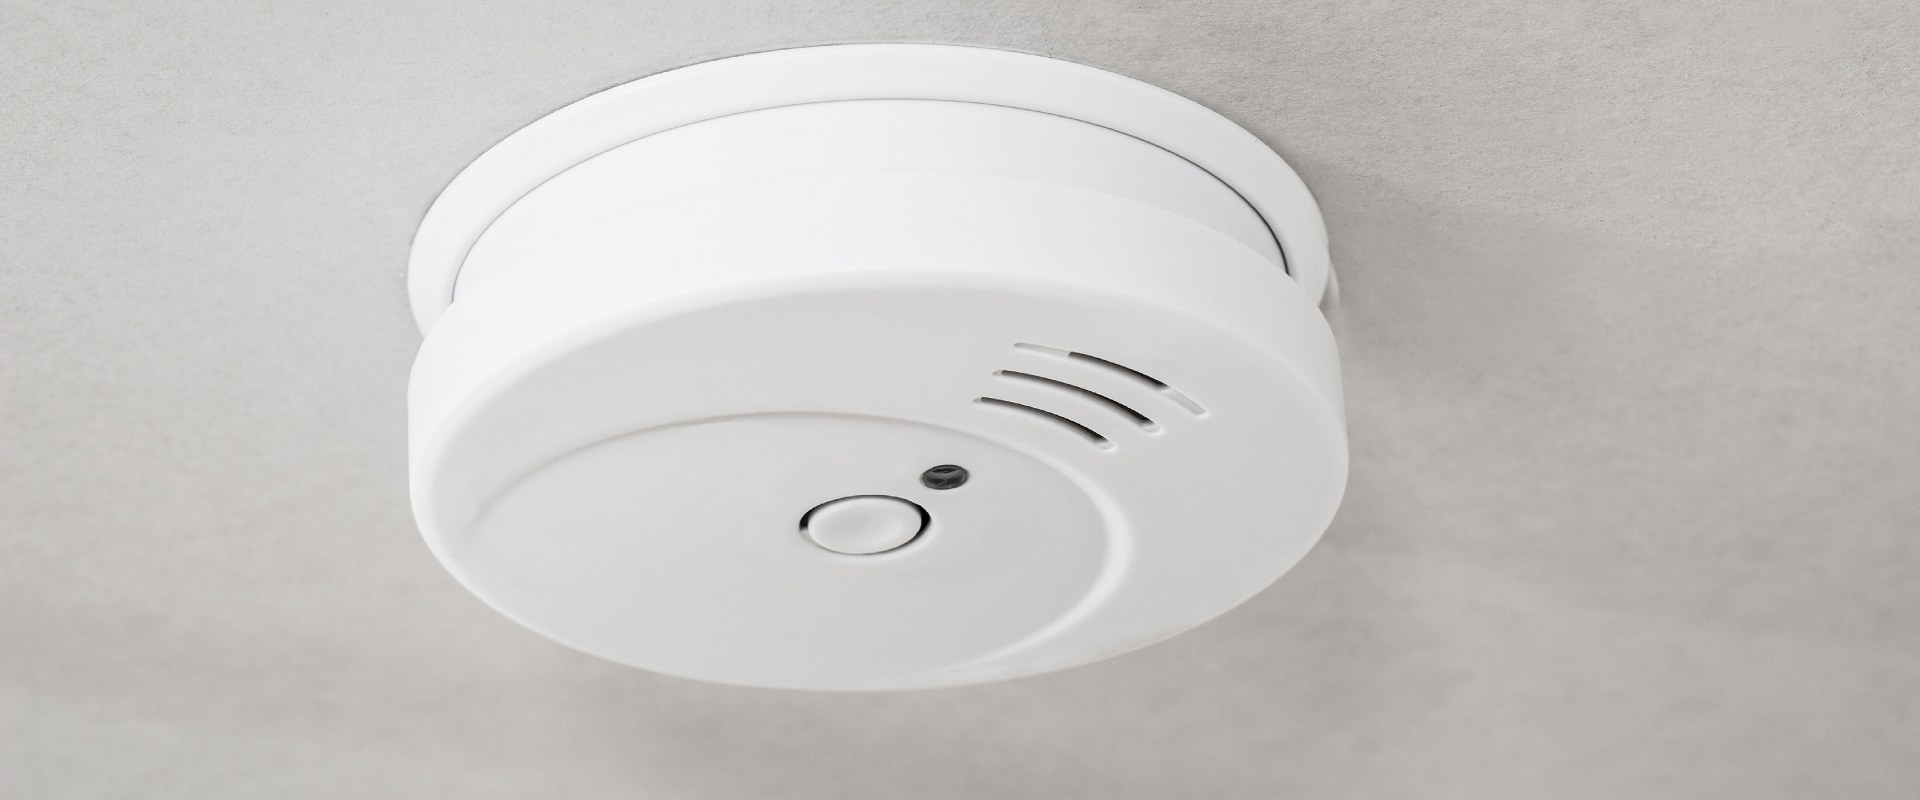 Carbon Monoxide Detectors and Alarms: Protecting Your Home